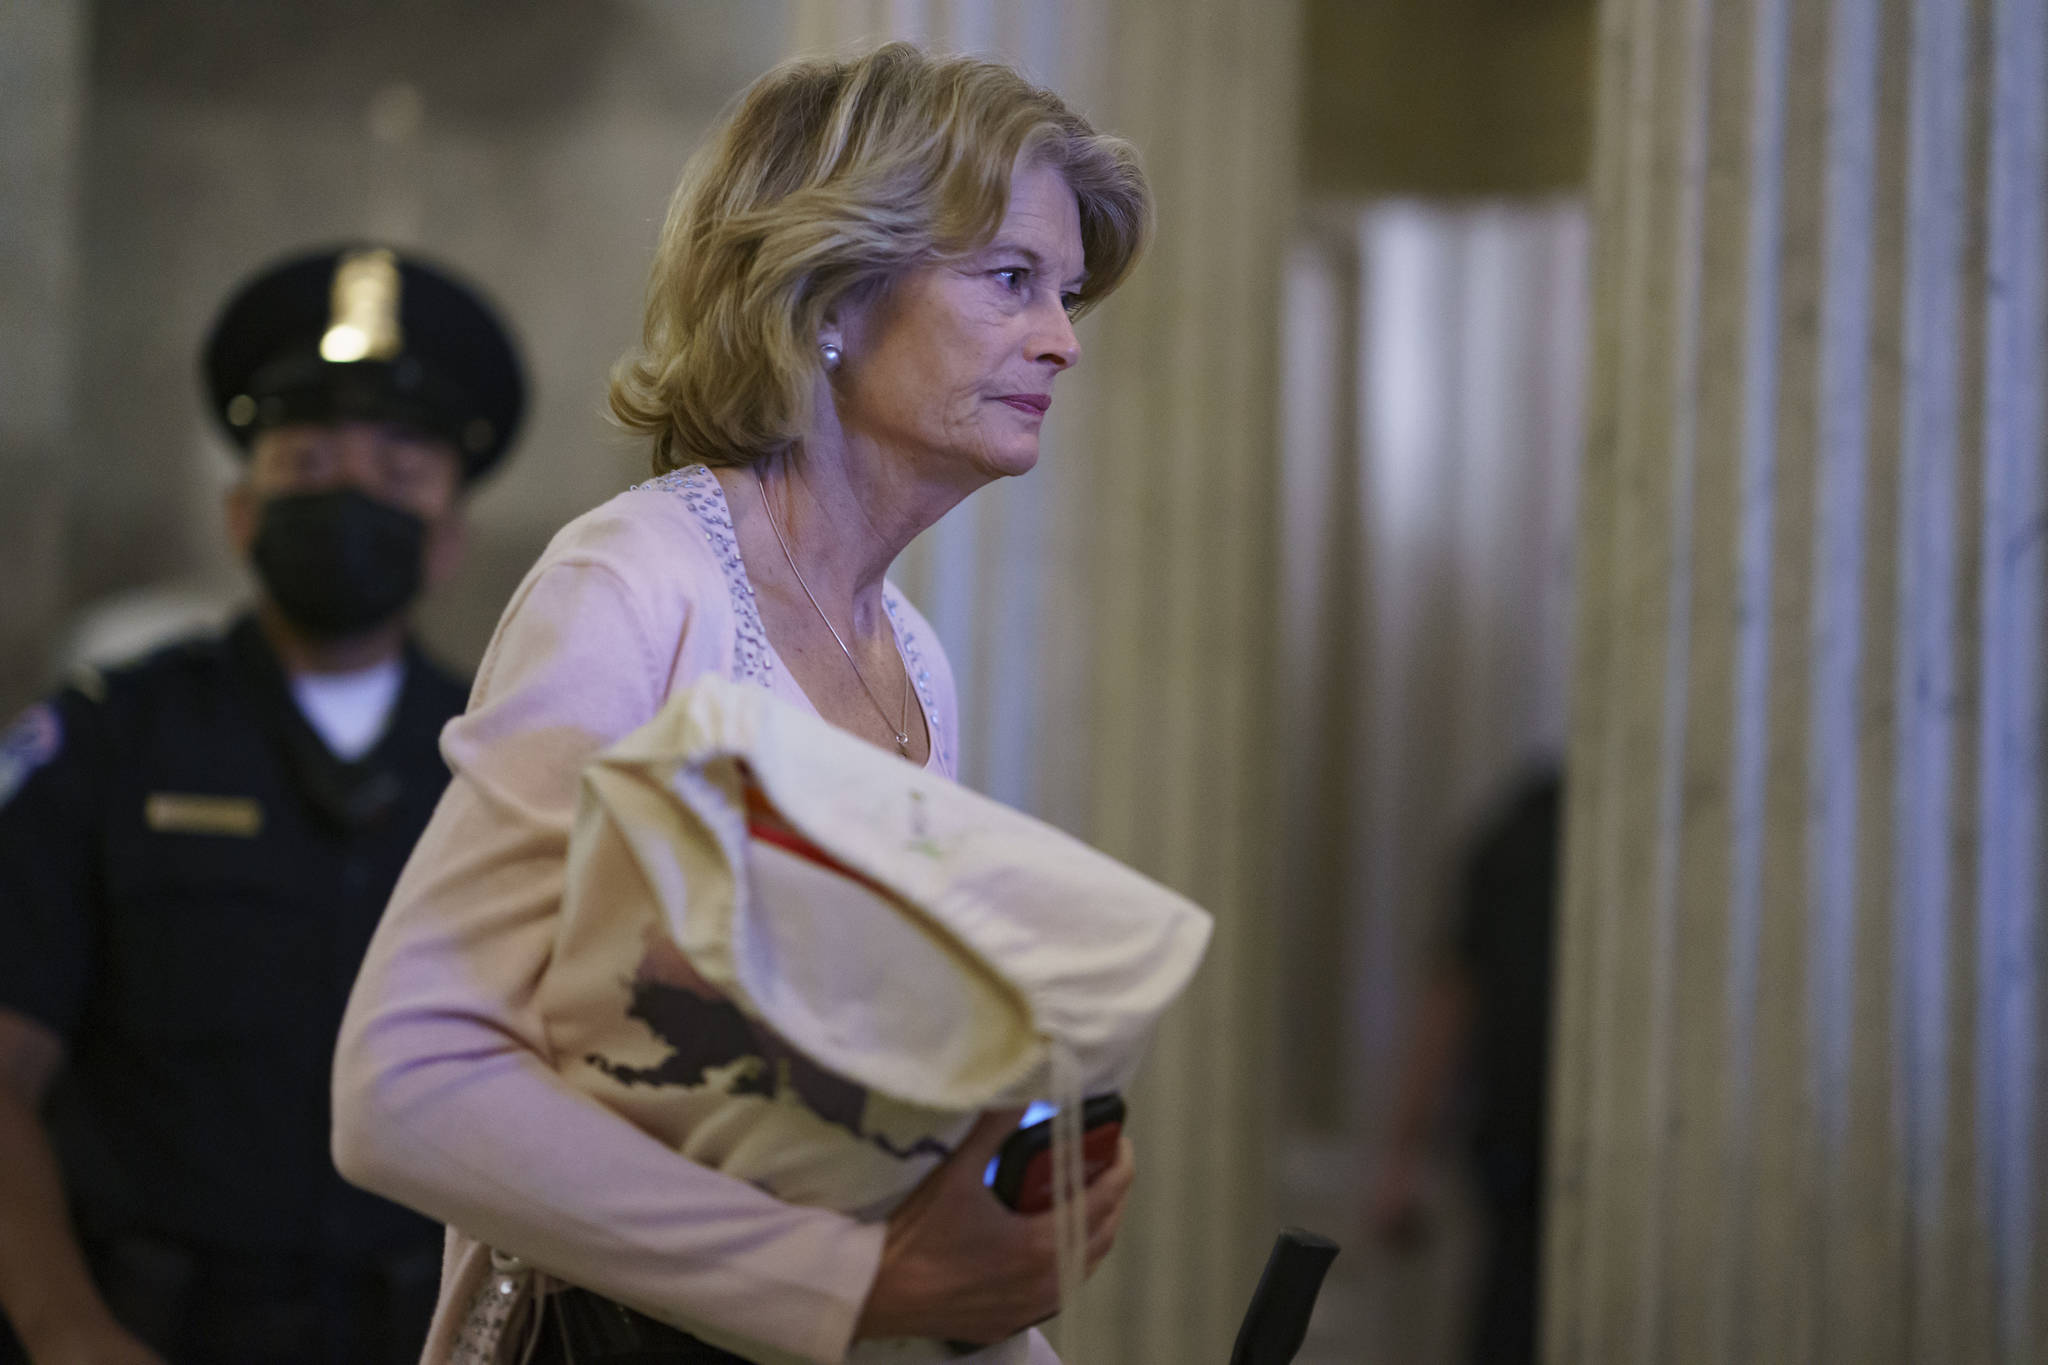 Sen. Lisa Murkowski, R-Alaska, one of the key Senate Republicans who negotiated the $1 trillion bipartisan infrastructure bill with Democrats, departs after a procedural vote on the measure, at the Capitol in Washington, Saturday, Aug. 7, 2021. More votes will be needed before final Senate passage. (AP Photo / J. Scott Applewhite)